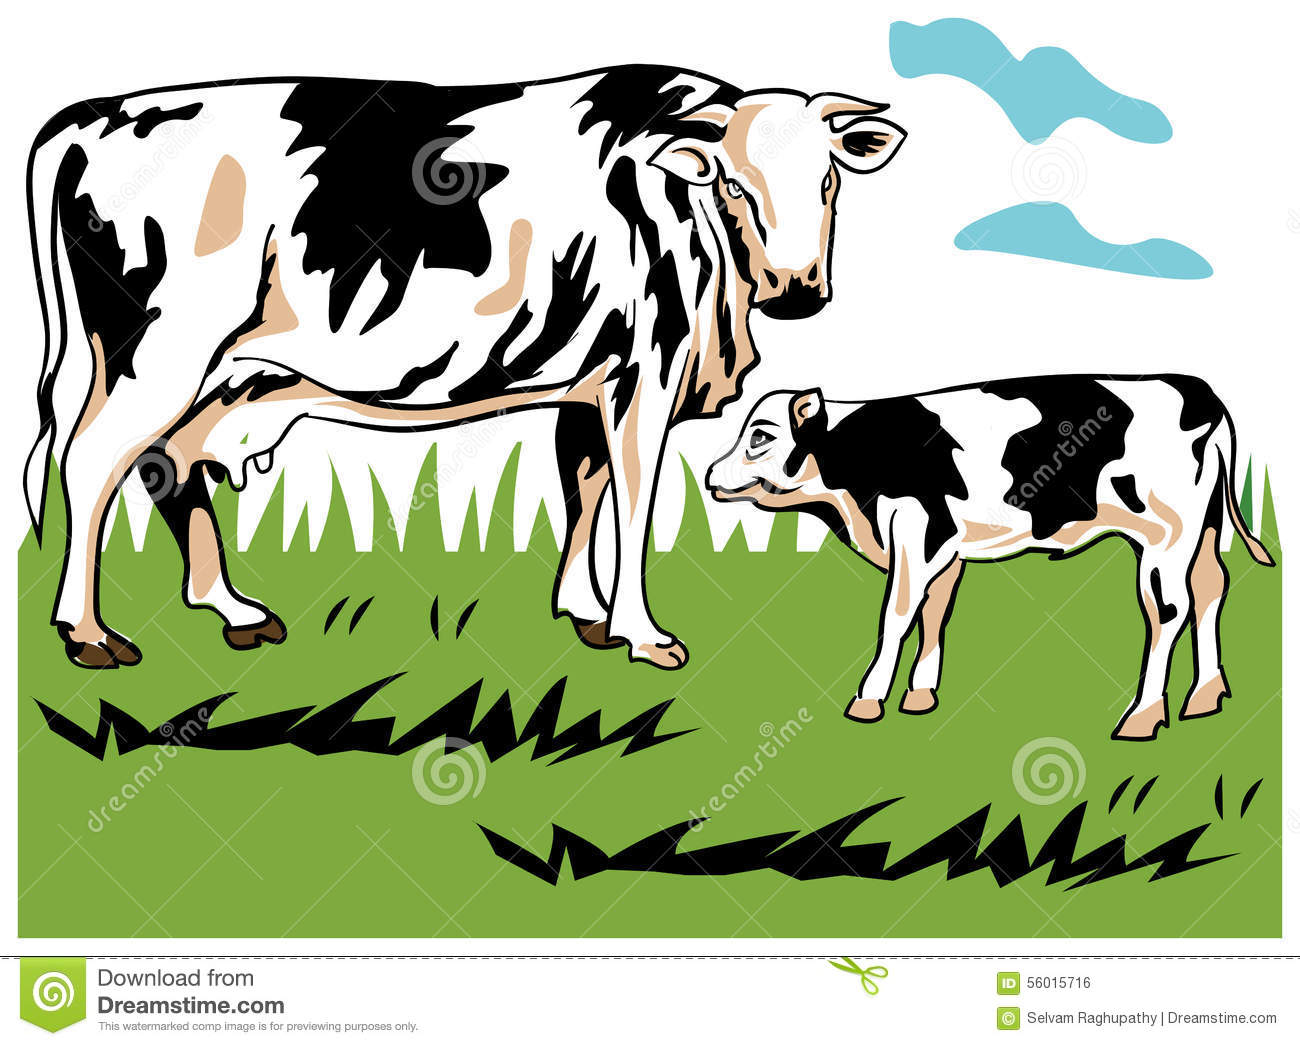 Cattle clipart calf, Cattle calf Transparent FREE for